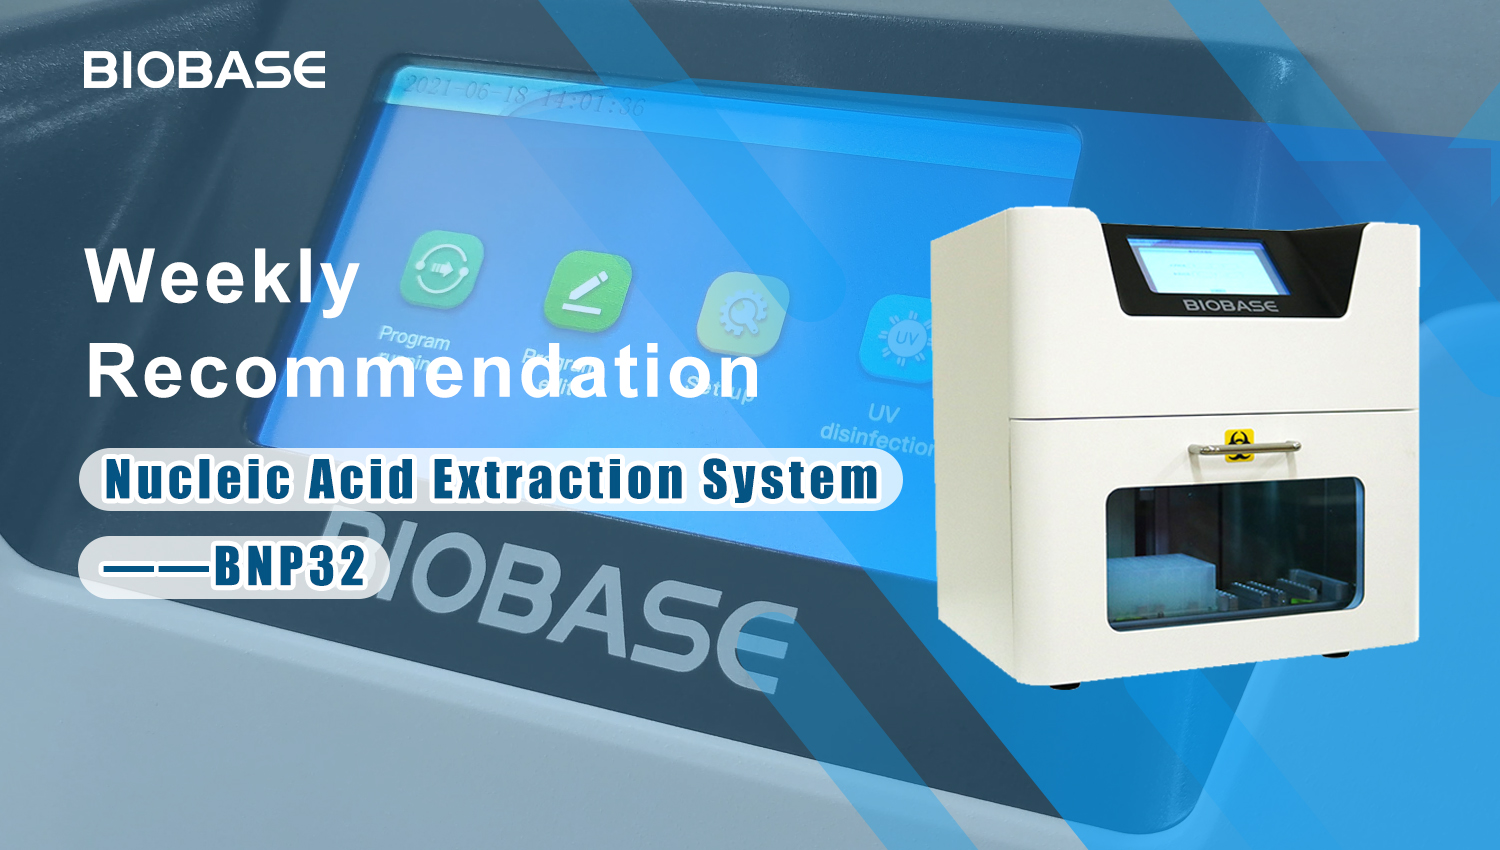 Weekly Recommendation Nucleic Acid Extraction System-BNP32